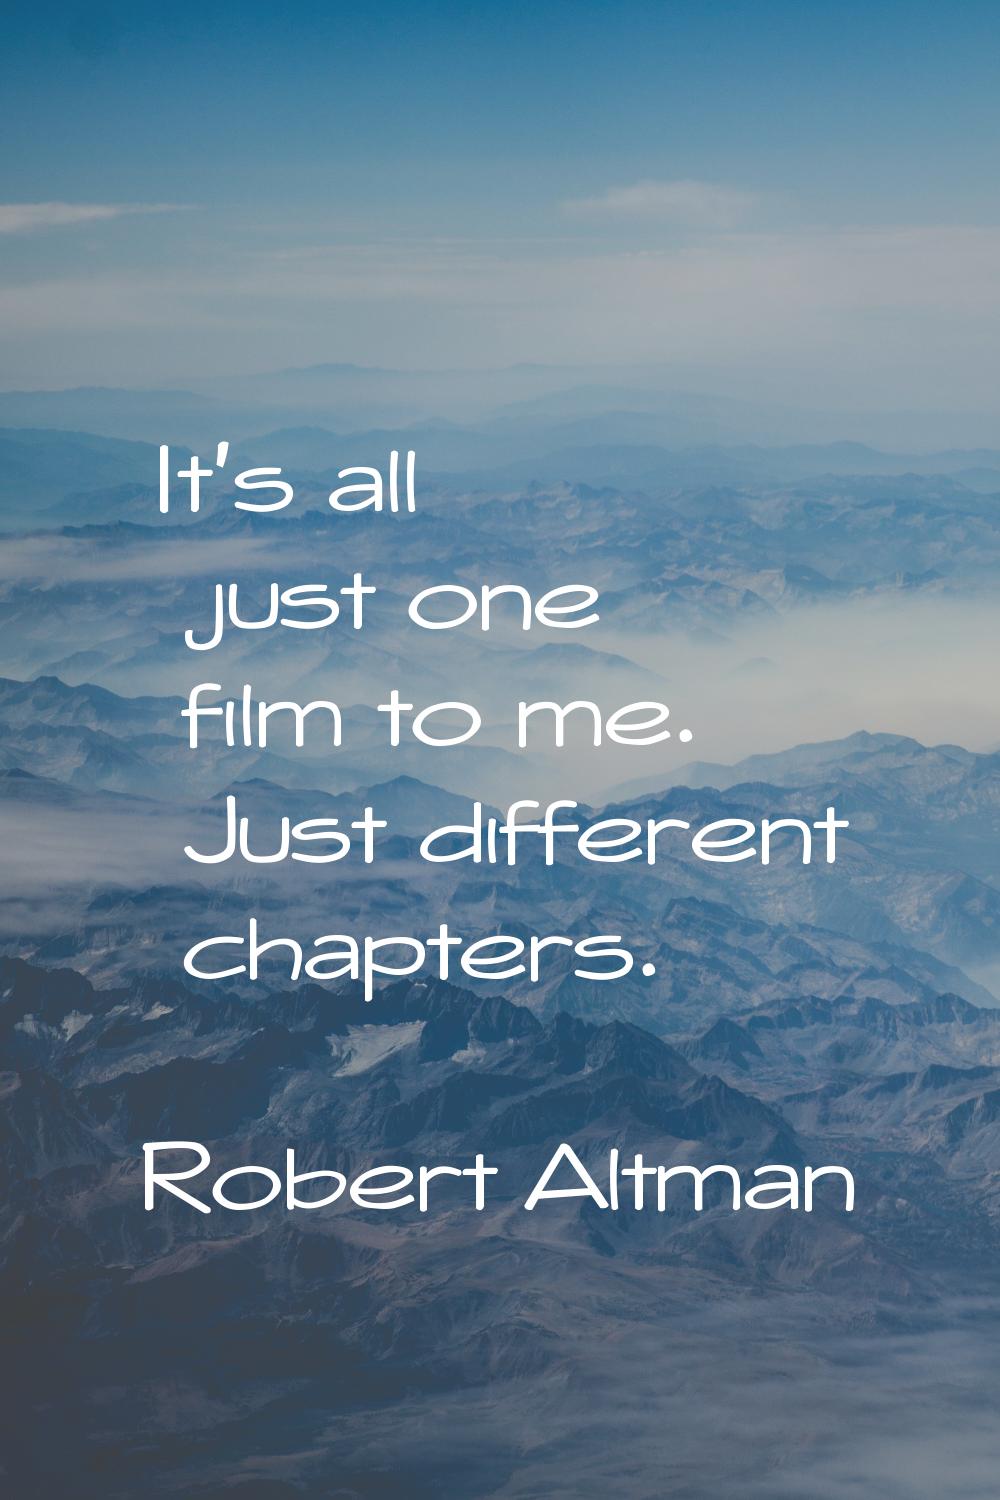 It's all just one film to me. Just different chapters.